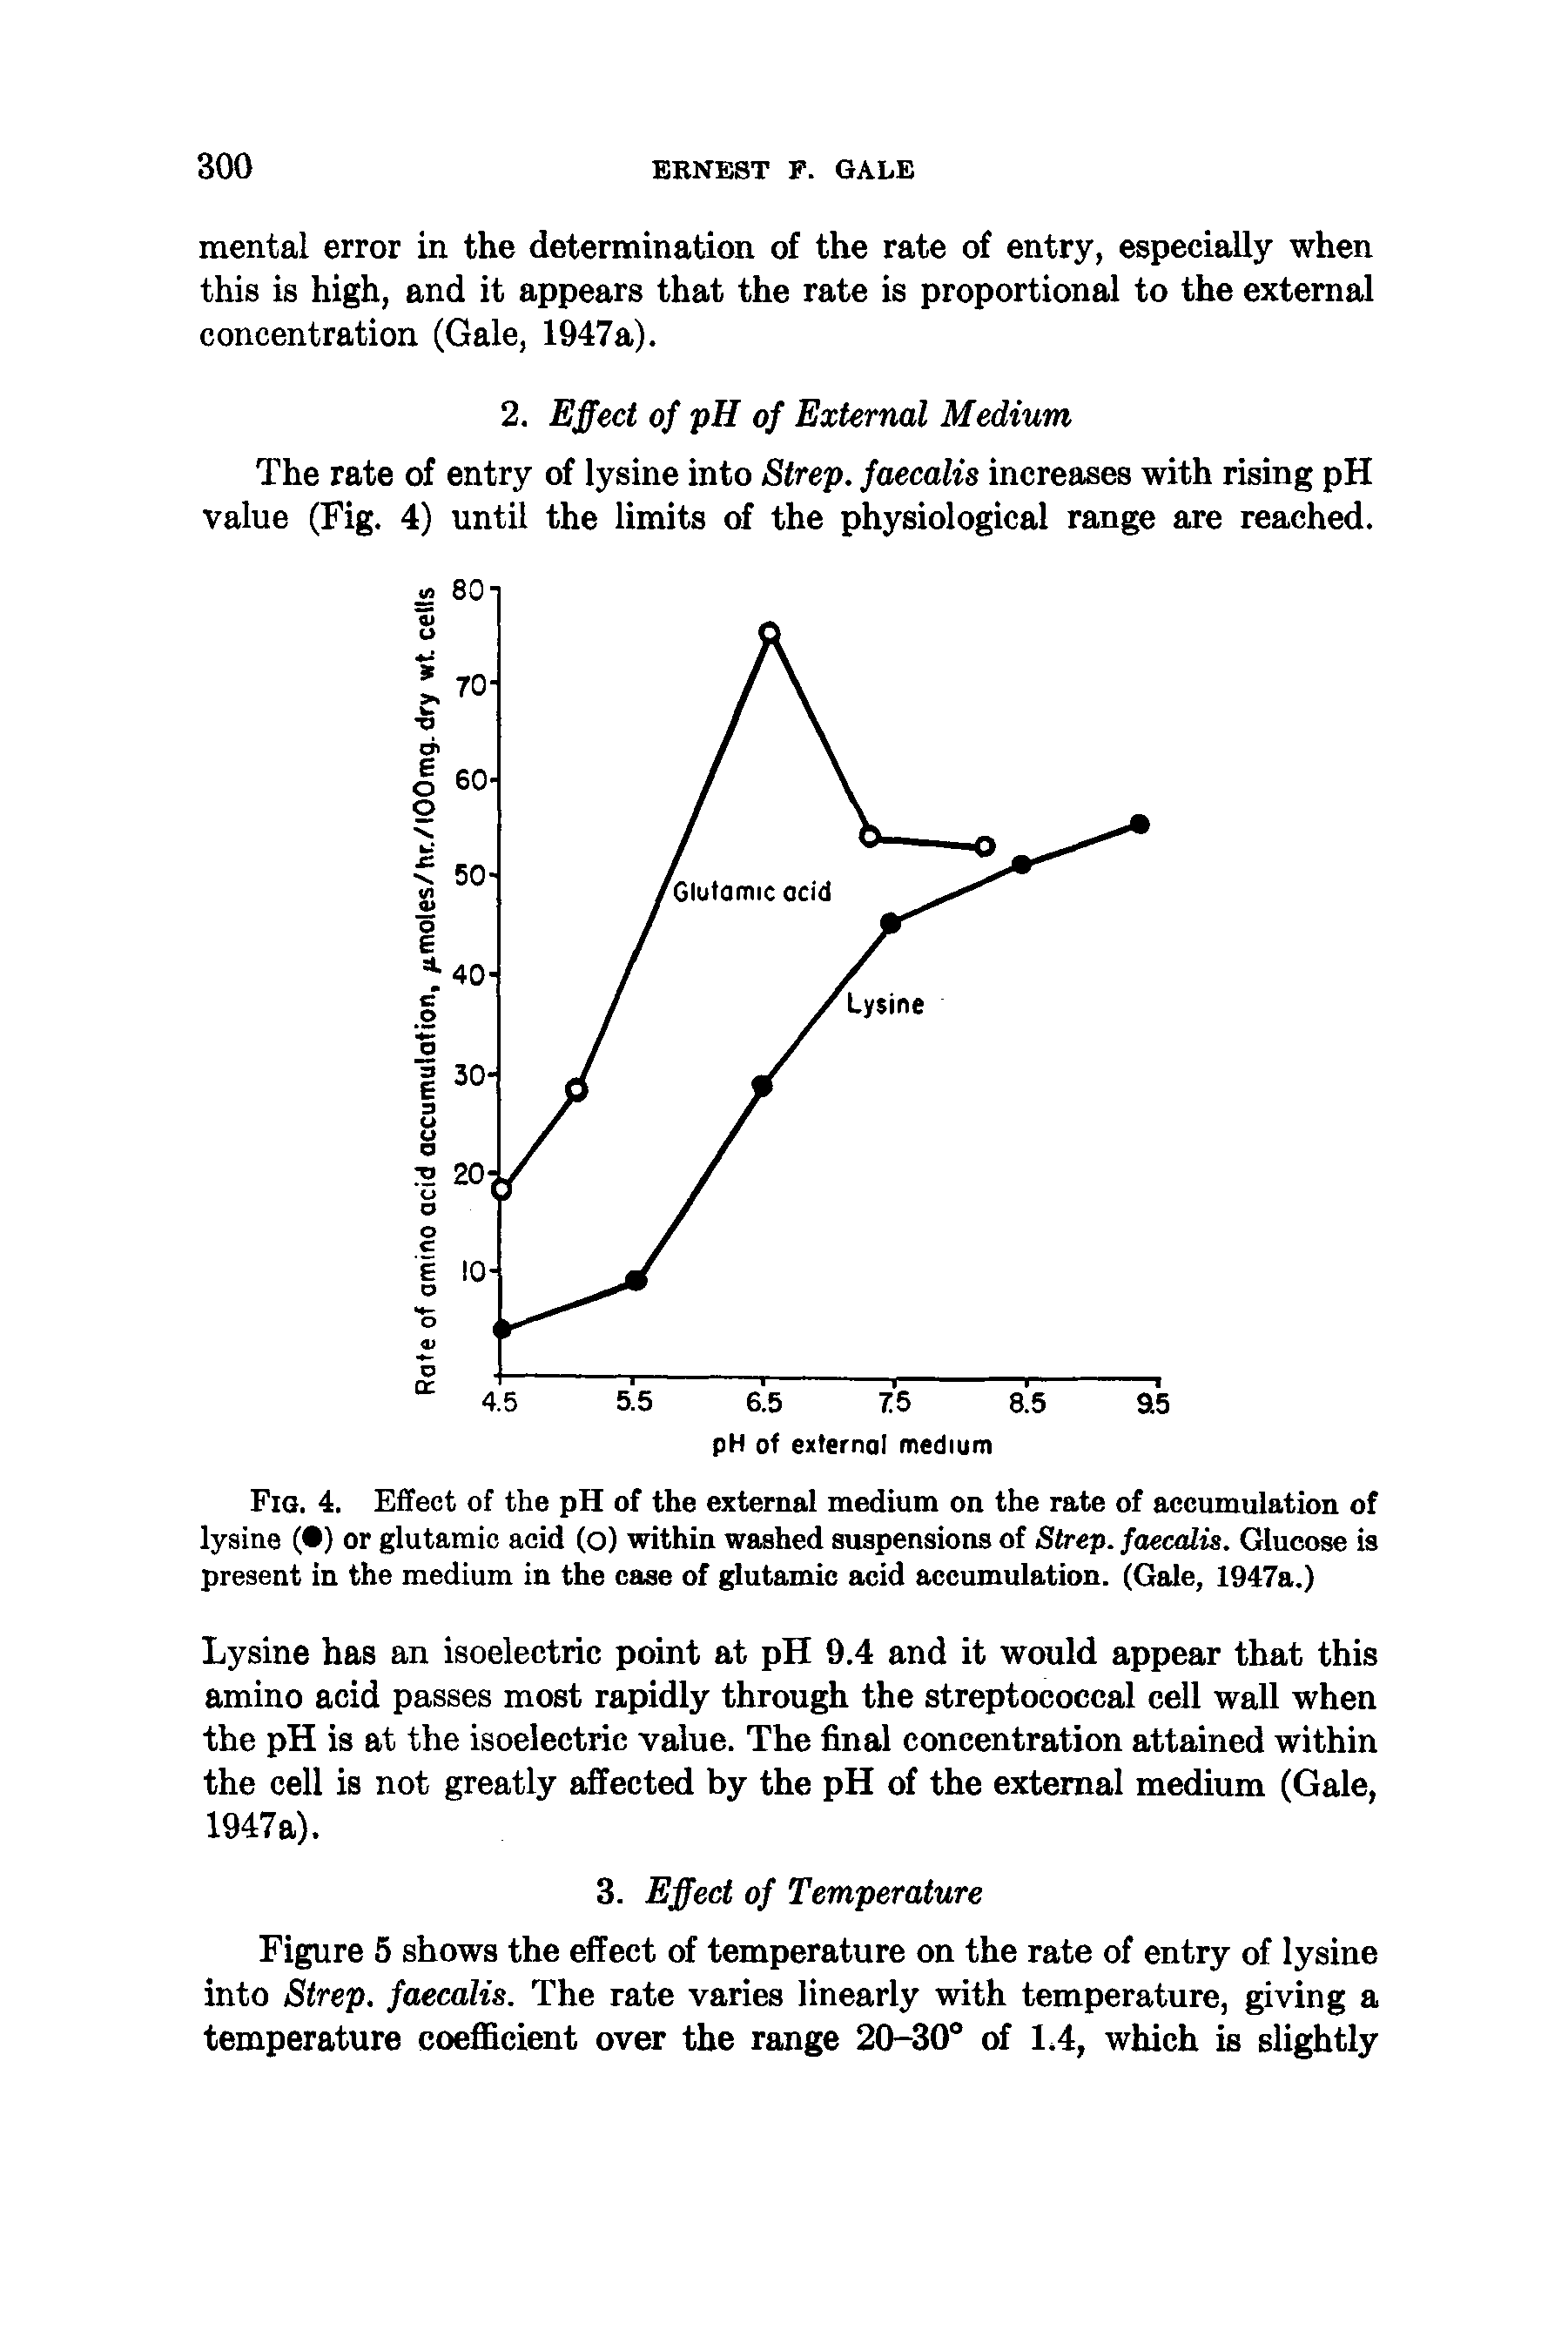 Fig. 4. Effect of the pH of the external medium on the rate of accumulation of lysine ( ) or glutamic acid (o) within washed suspensions of Strep, faecalis. Glucose is present in the medium in the case of glutamic acid accumulation. (Gale, 1947a.)...